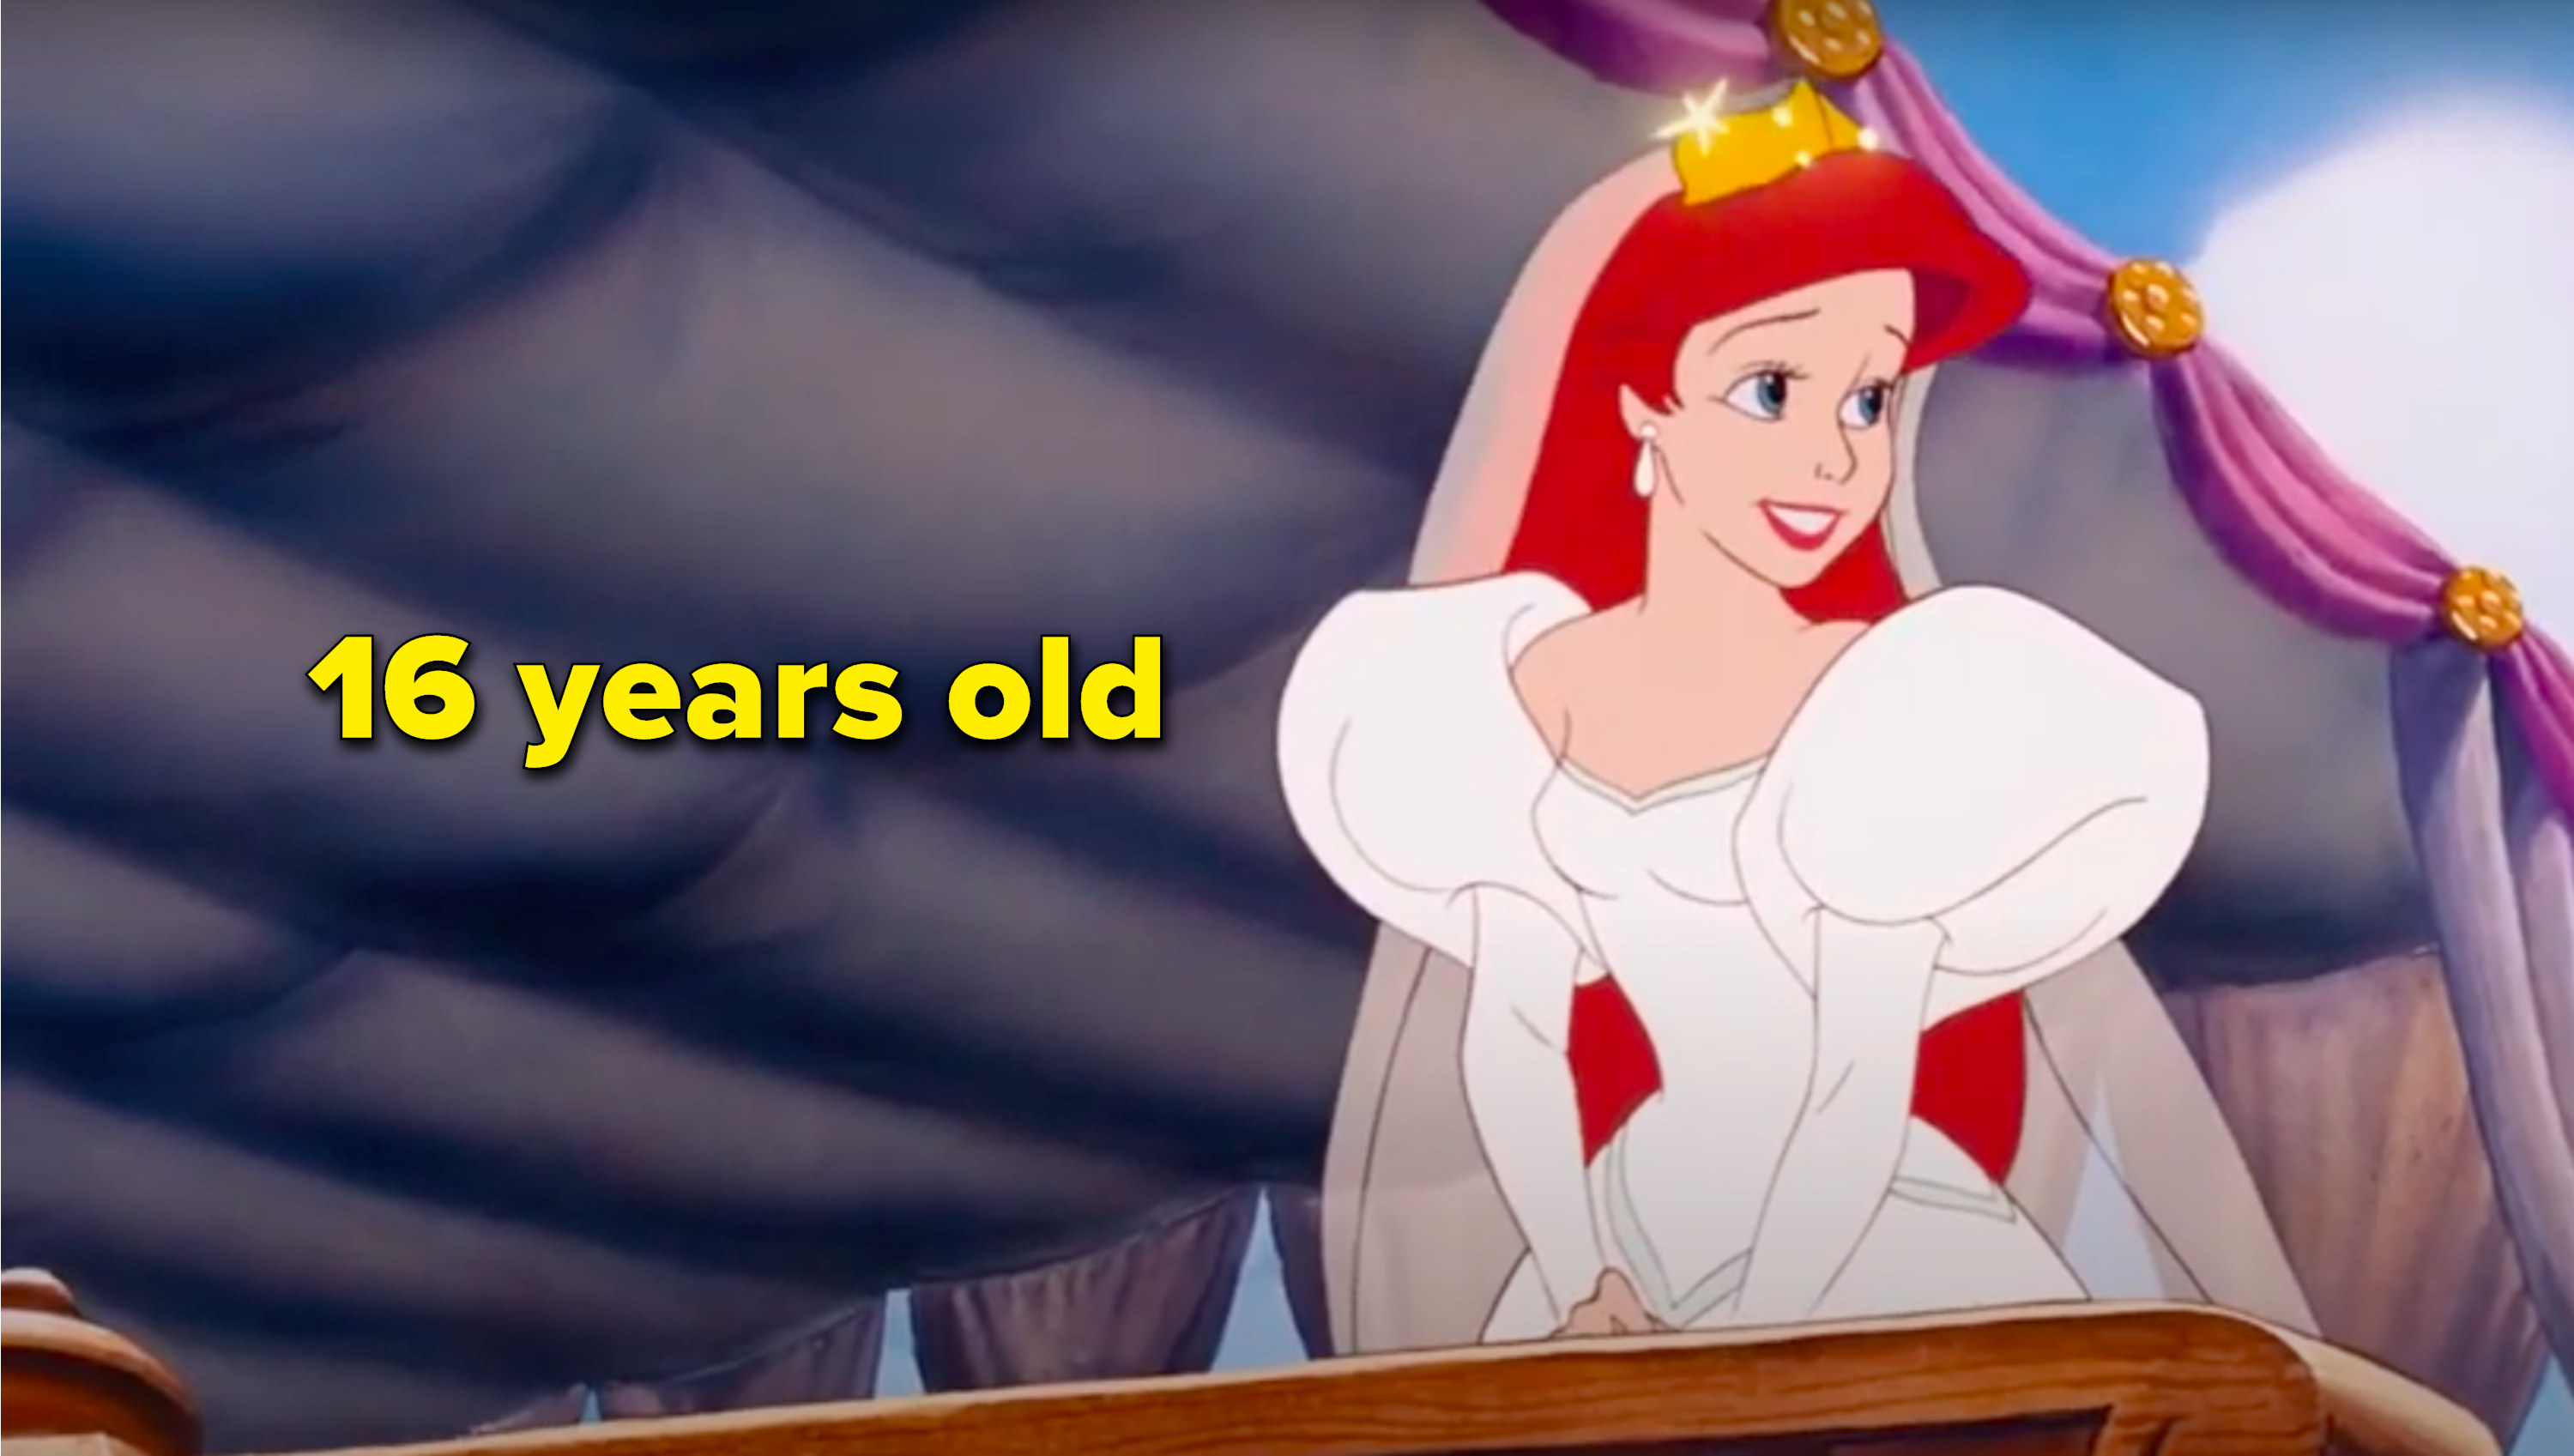 Ariel in her wedding dress with &quot;16 years old&quot; written next to her